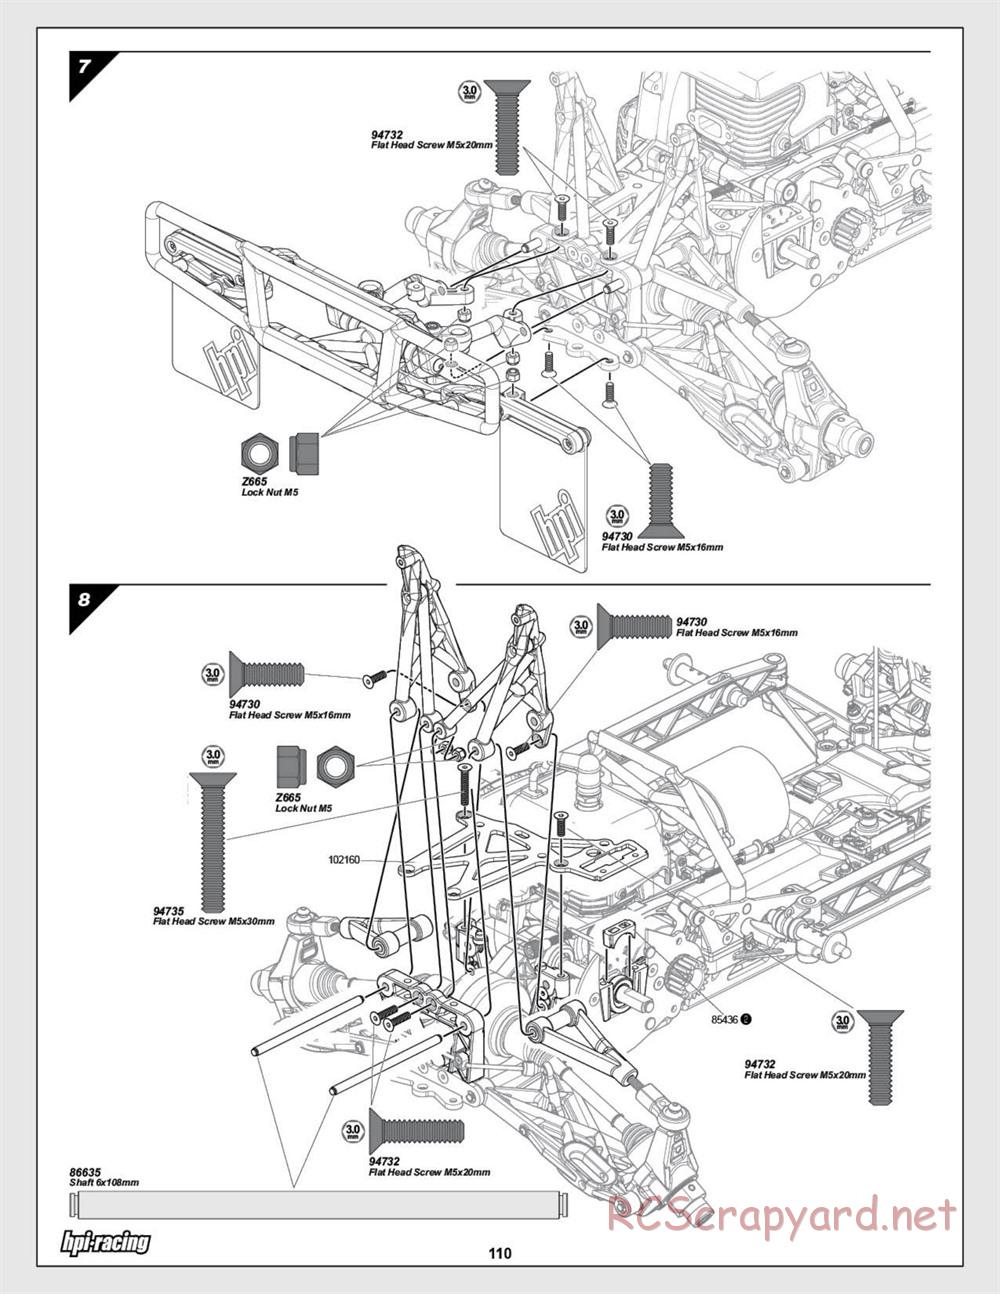 HPI - Baja 5SC SS - Exploded View - Page 110